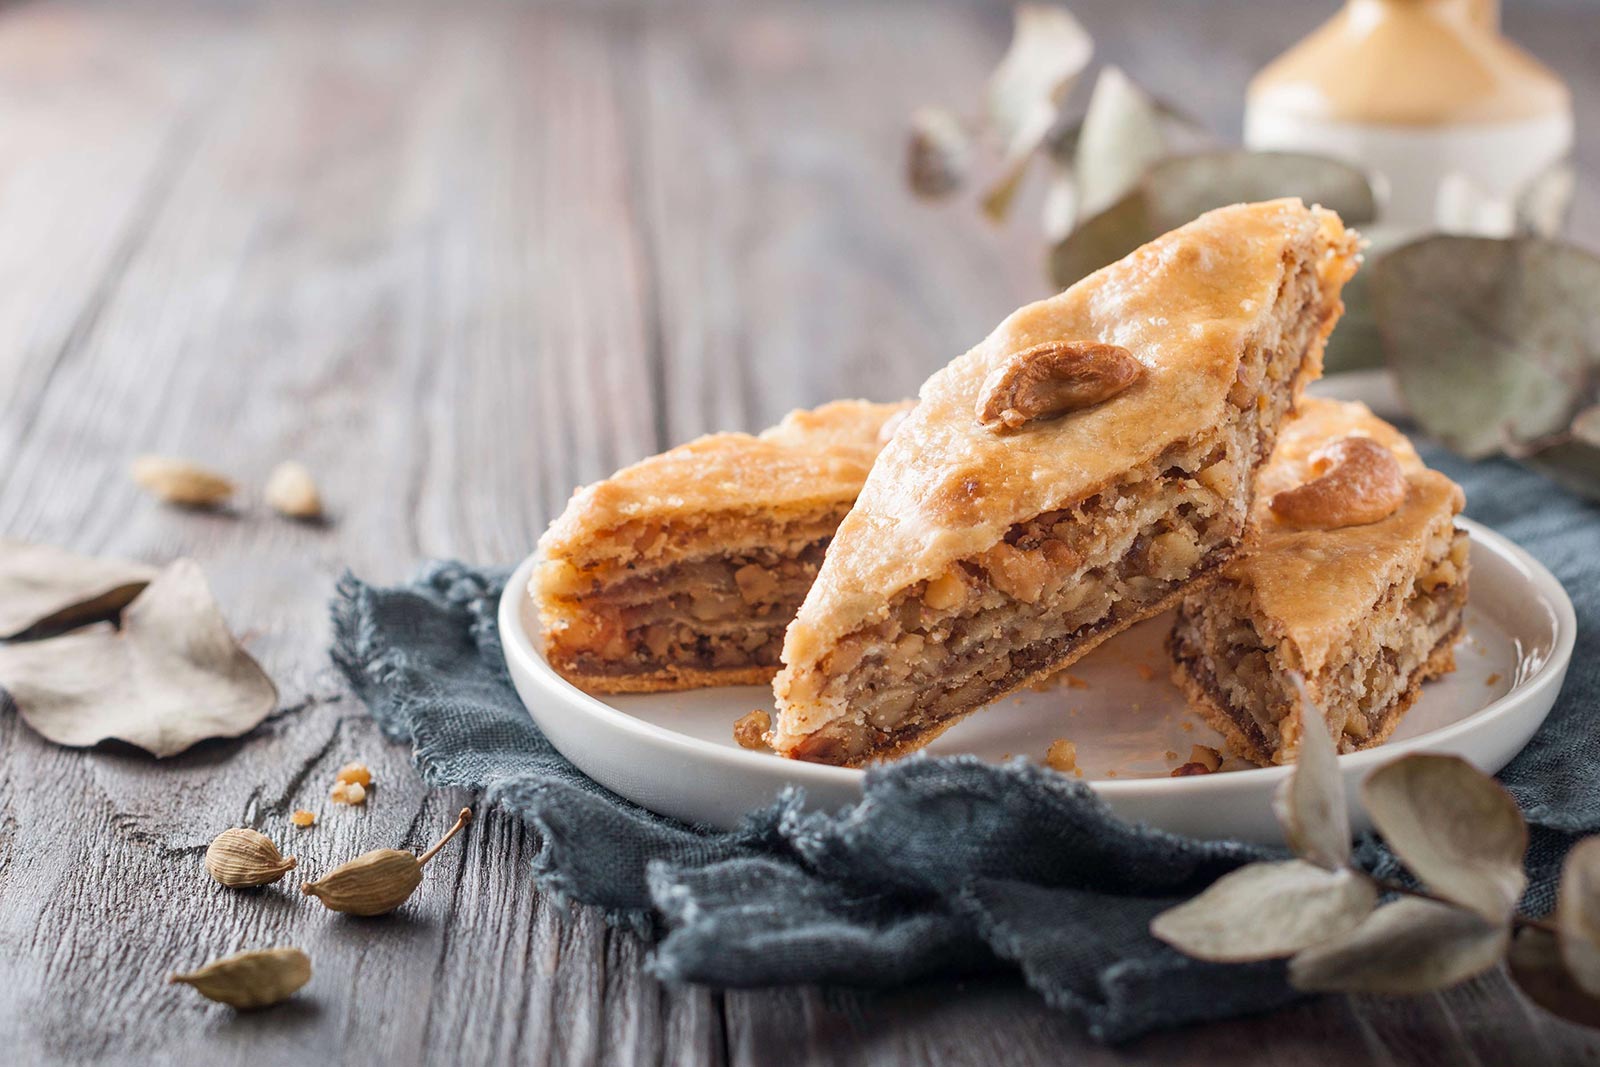 🥖 How Many Baked Goods Have You Tried from Around the World? Baklava